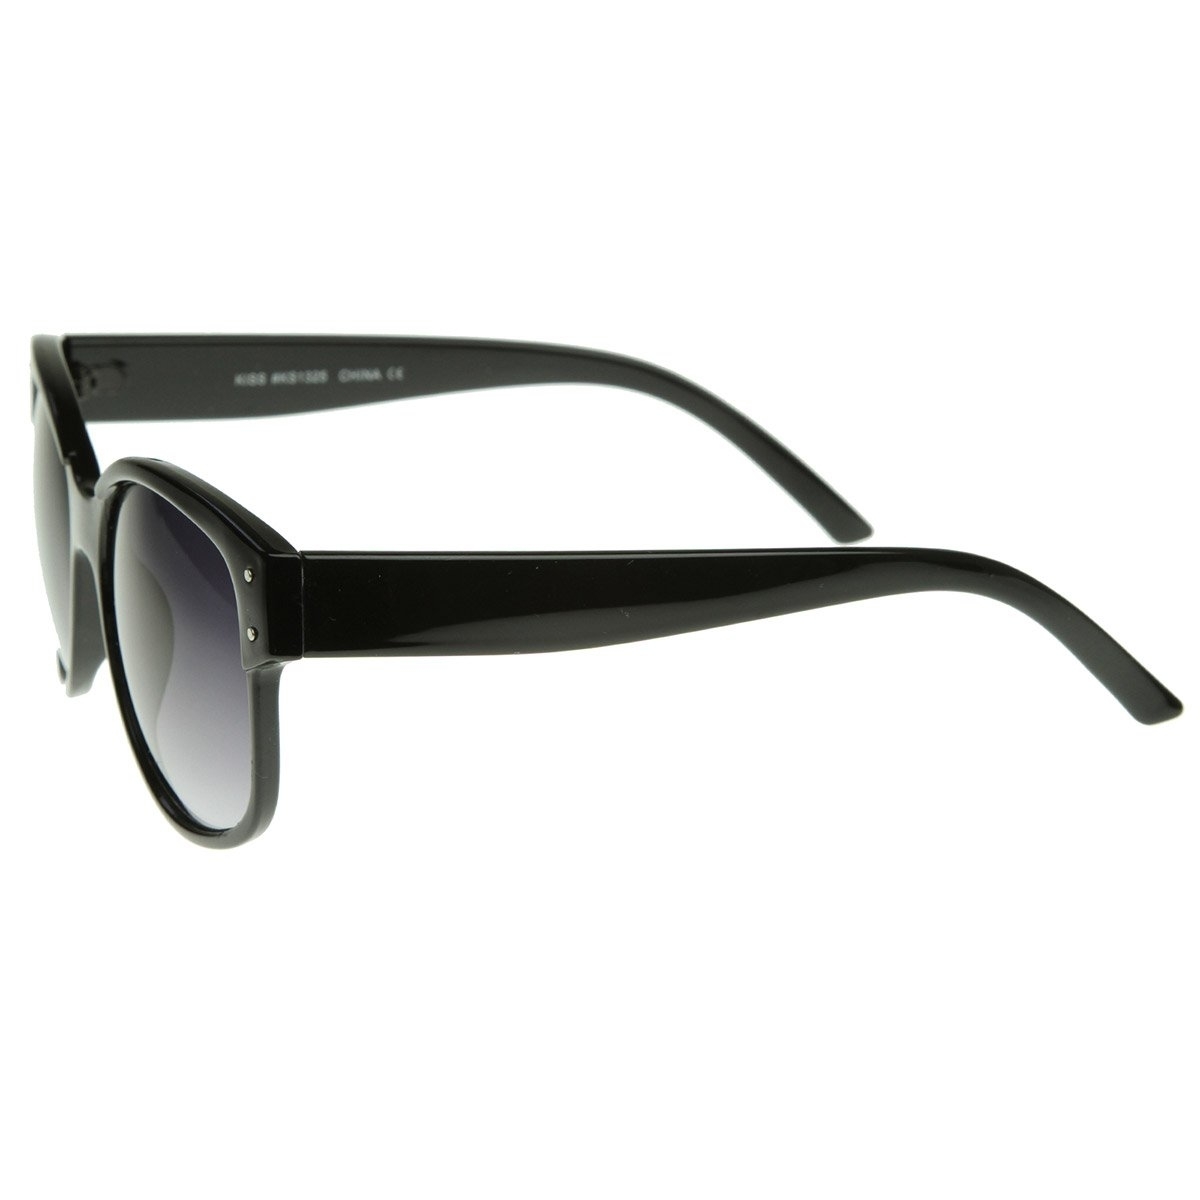 Designer Inspired Large Oversized Retro Style Sunglasses With Metal Rivets - Black